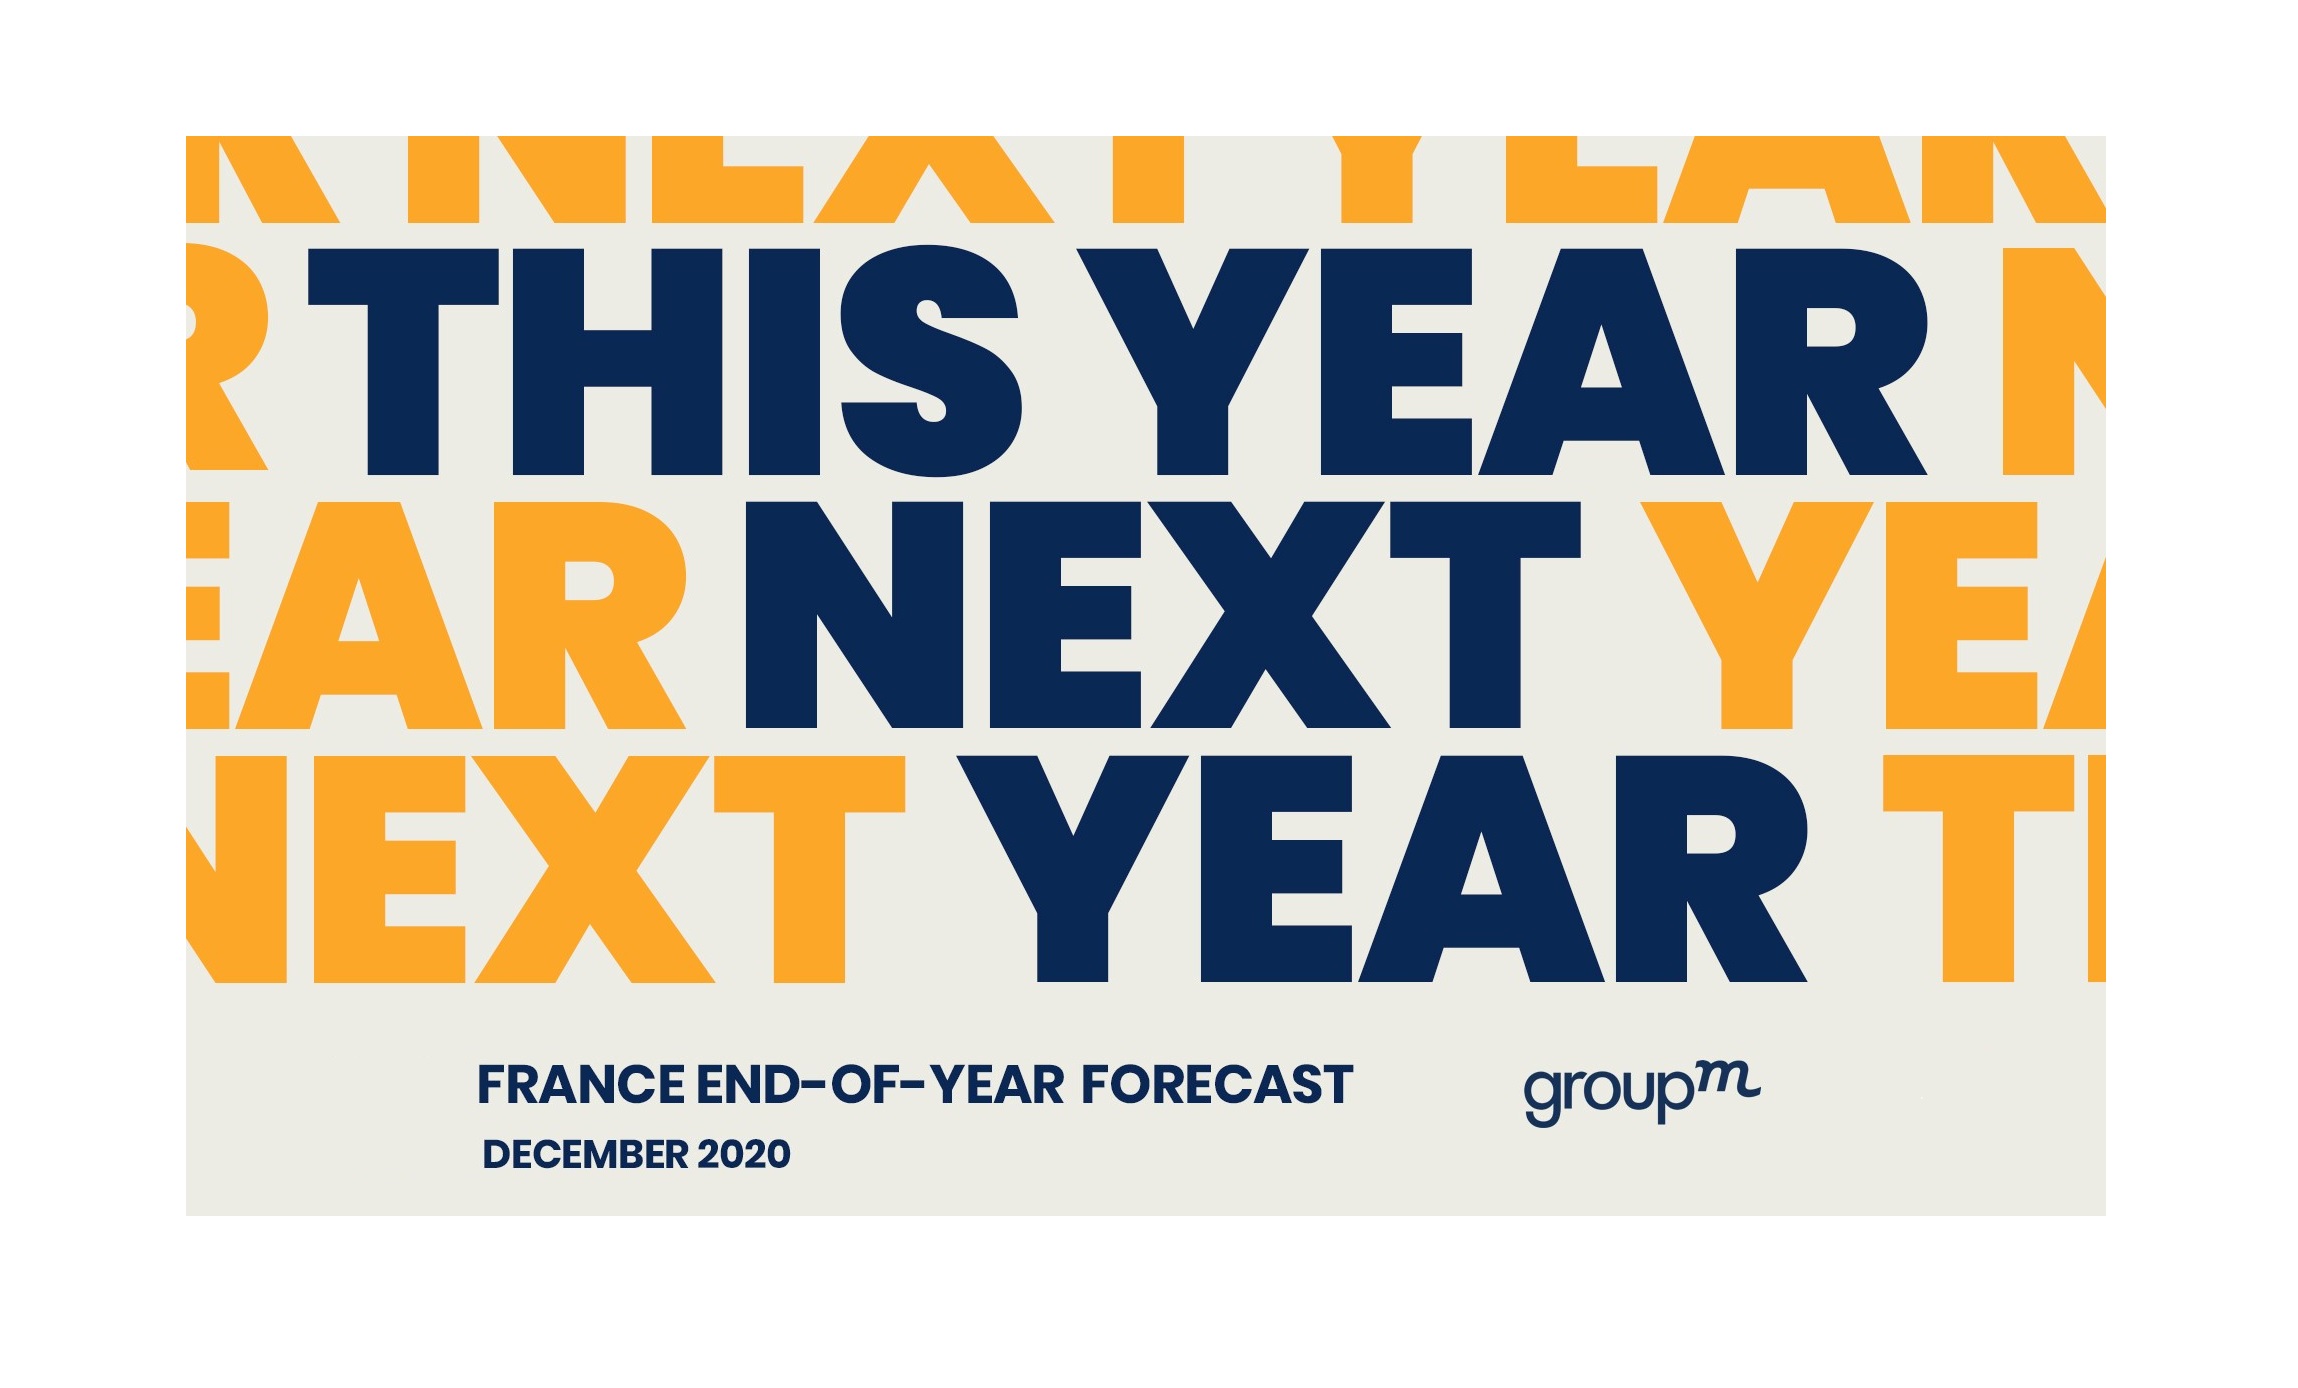 Cover image for  article: This Year Next Year: France End-of-Year Forecast - Olivier Baconnet, GroupM France